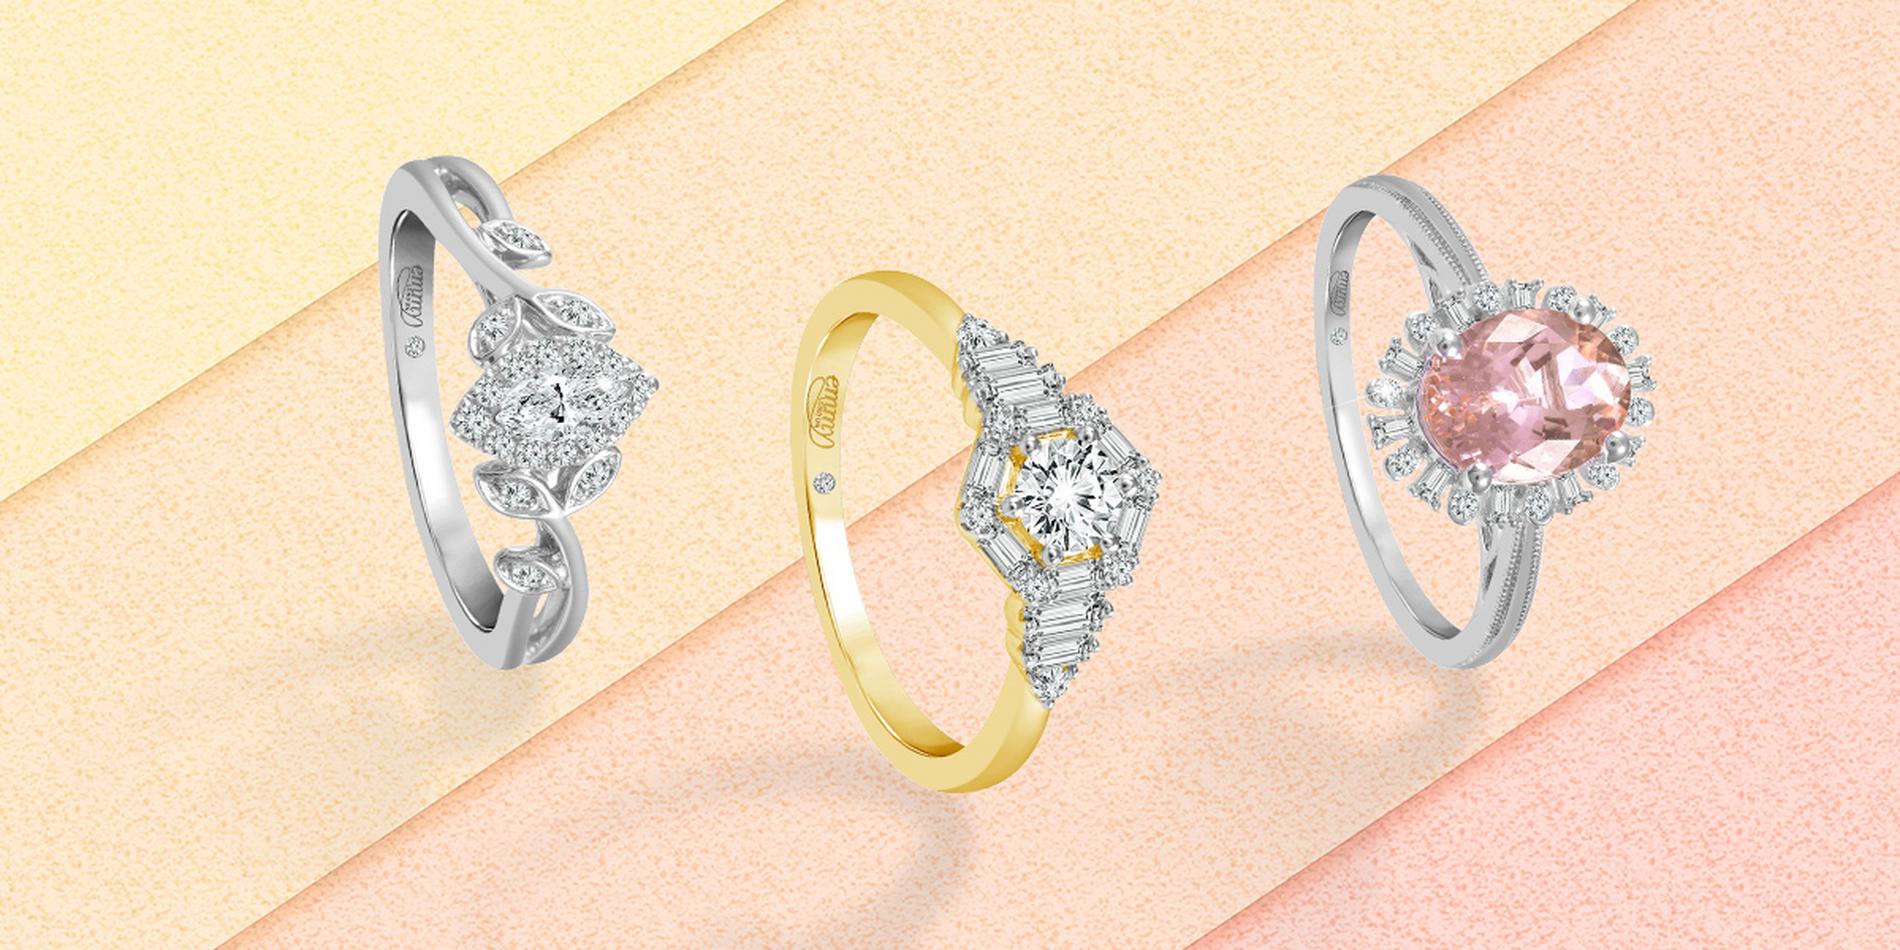 How to choose a unique engagement ring